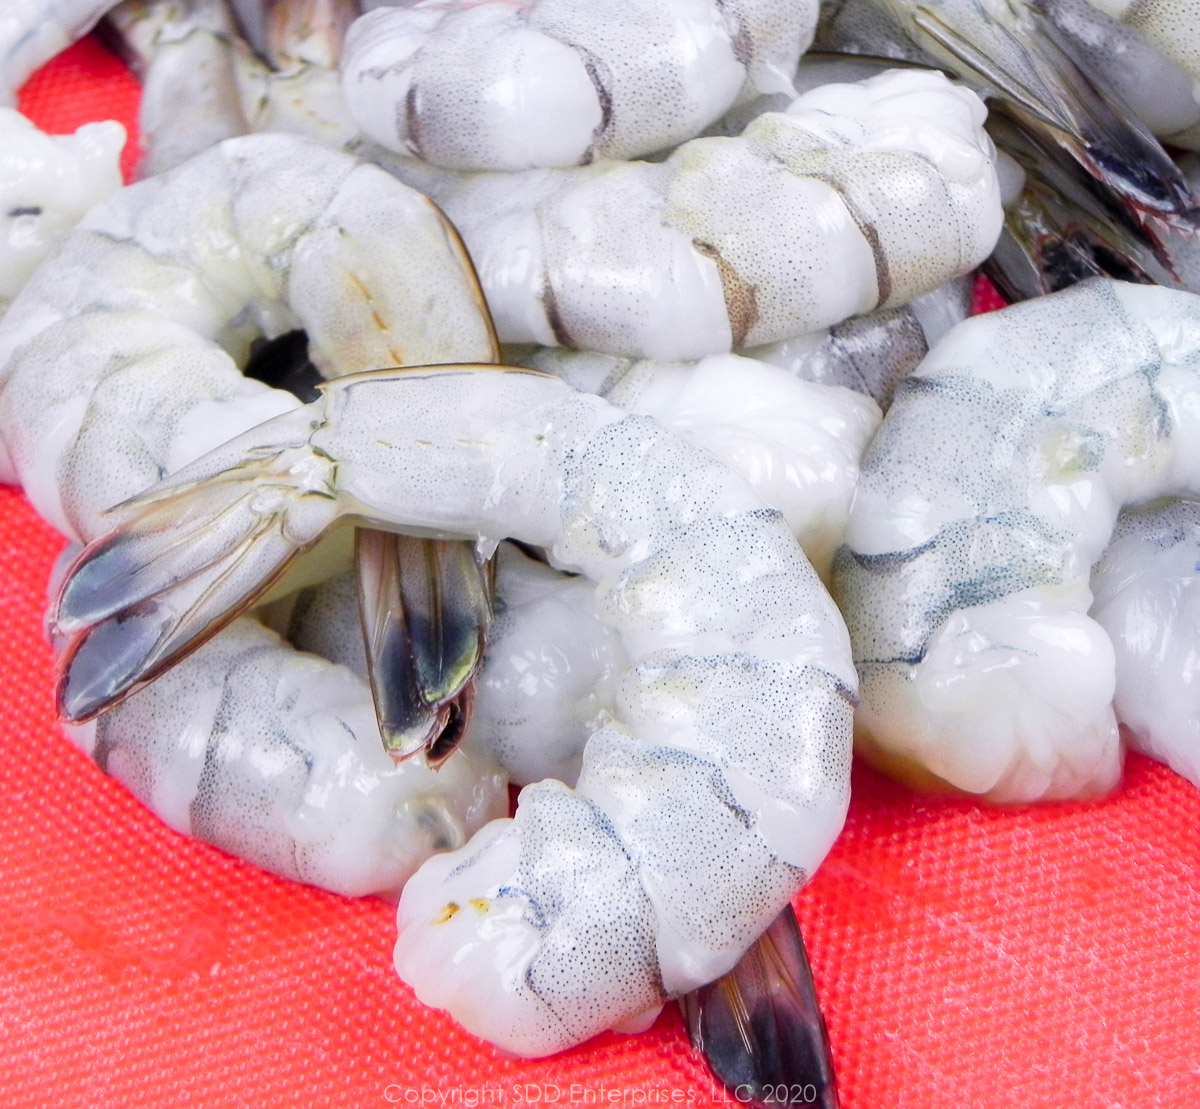 peeled shrimp with tail shell left on